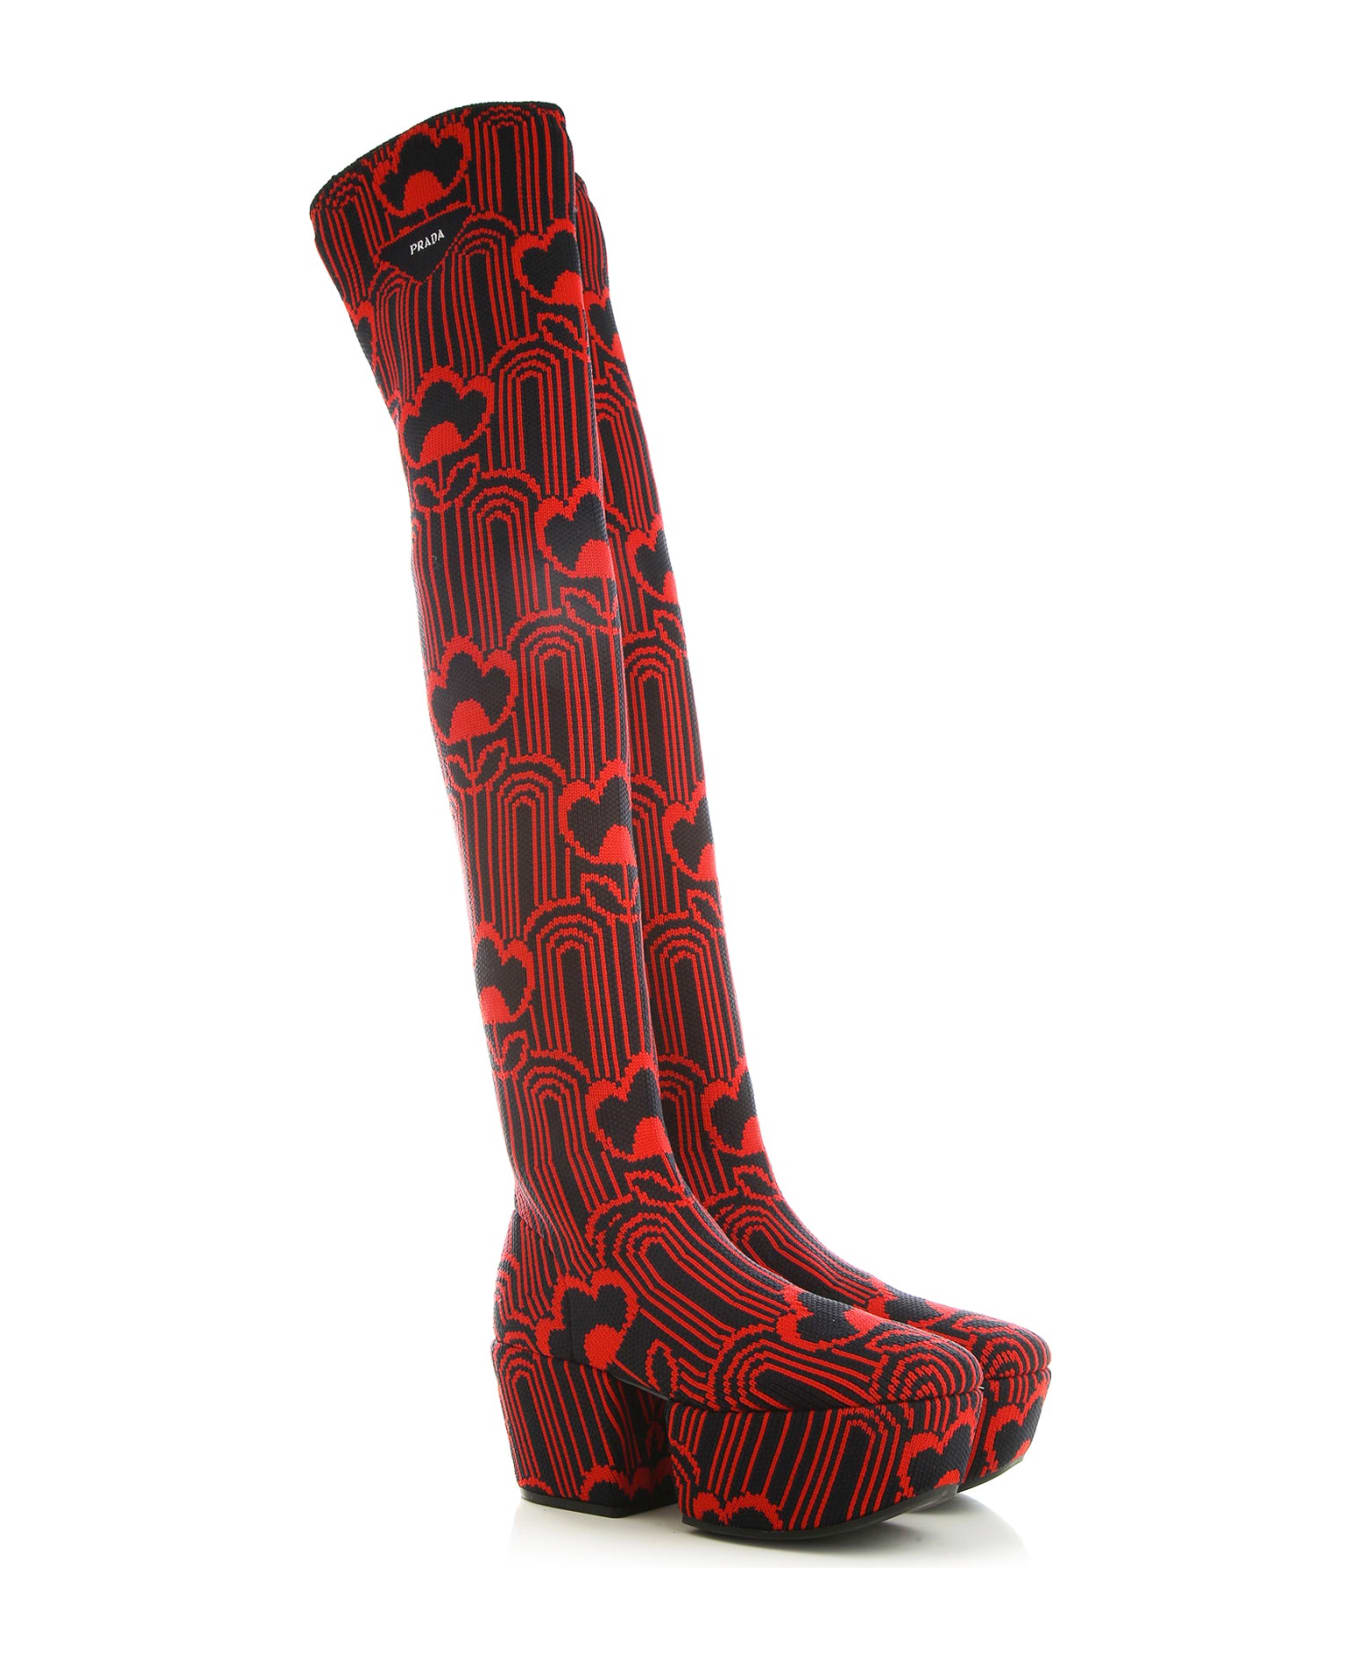 Prada Jaquard Embroidered Boots - Red ブーツ